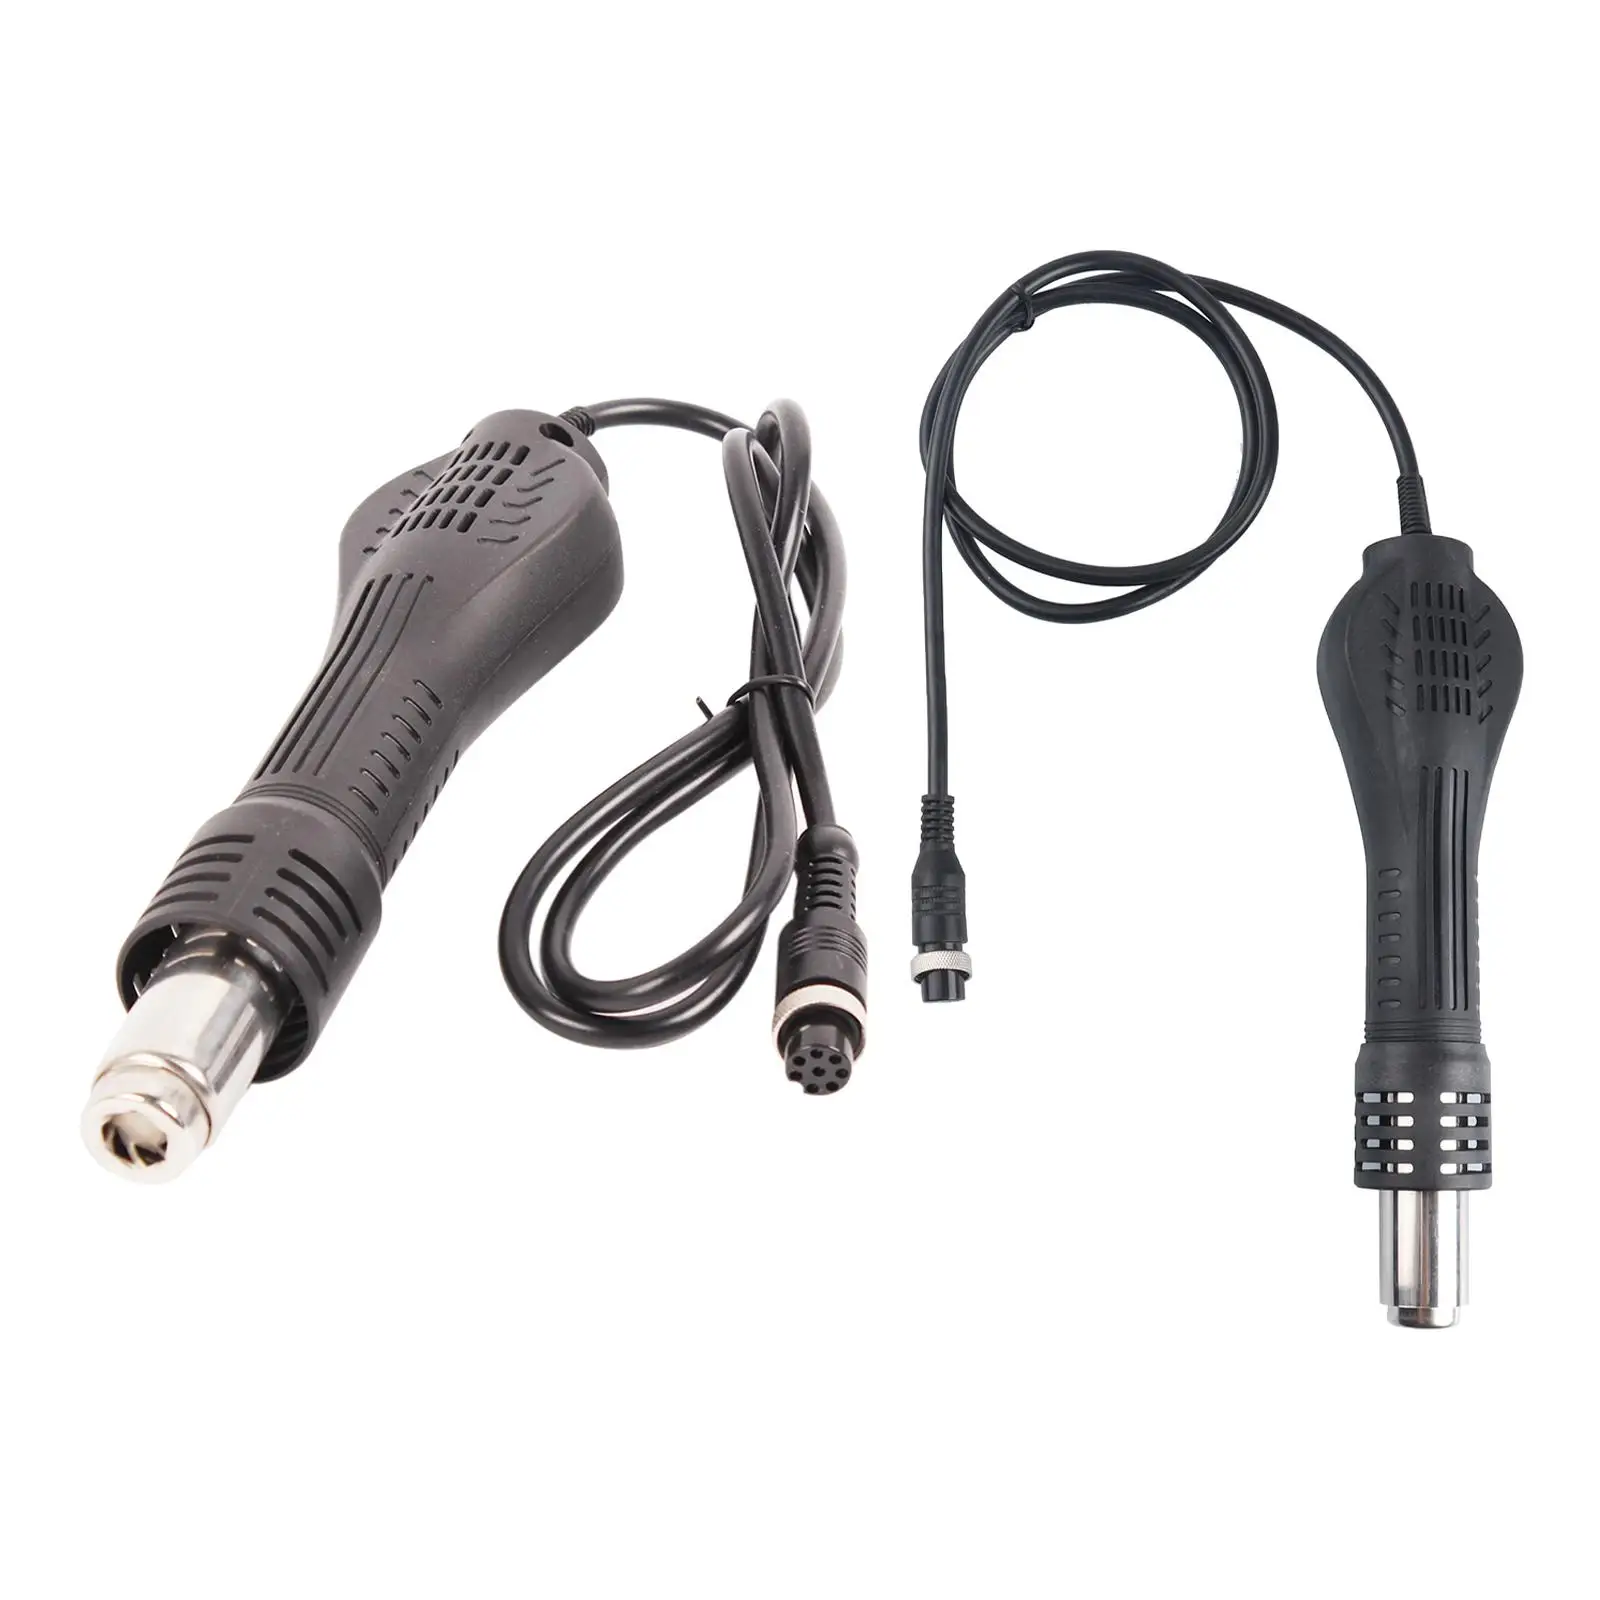 Hot Air Welding Tools Smooth Portable Non Slip Handle for 858 878 8586 898D Soldering Station Rework Solder Station Repair